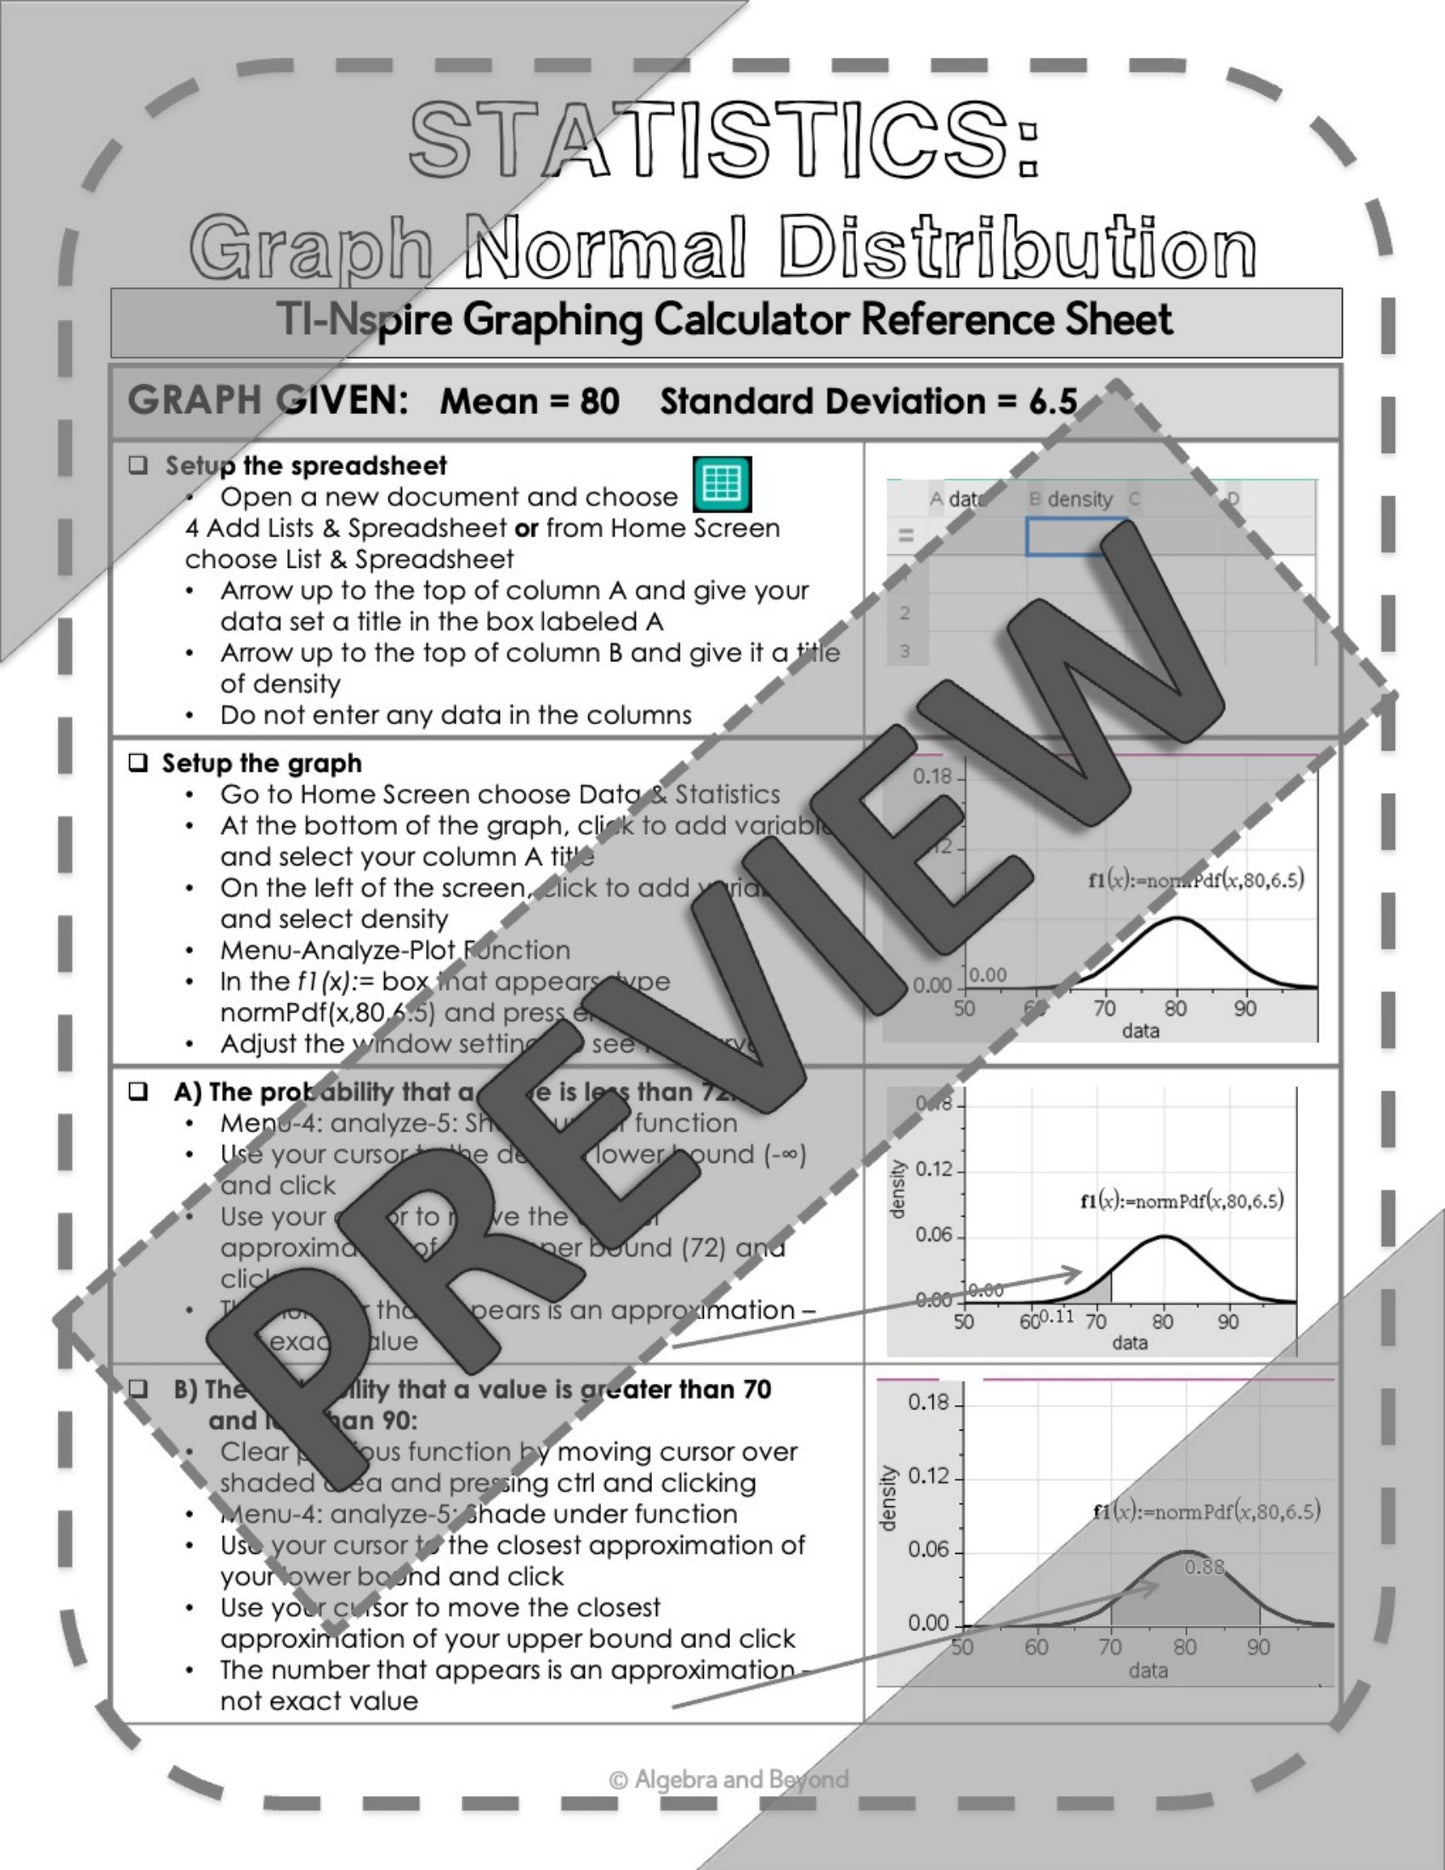 Normal Distribution | Statistics | TI-Nspire Graphing Calculator Reference Sheet